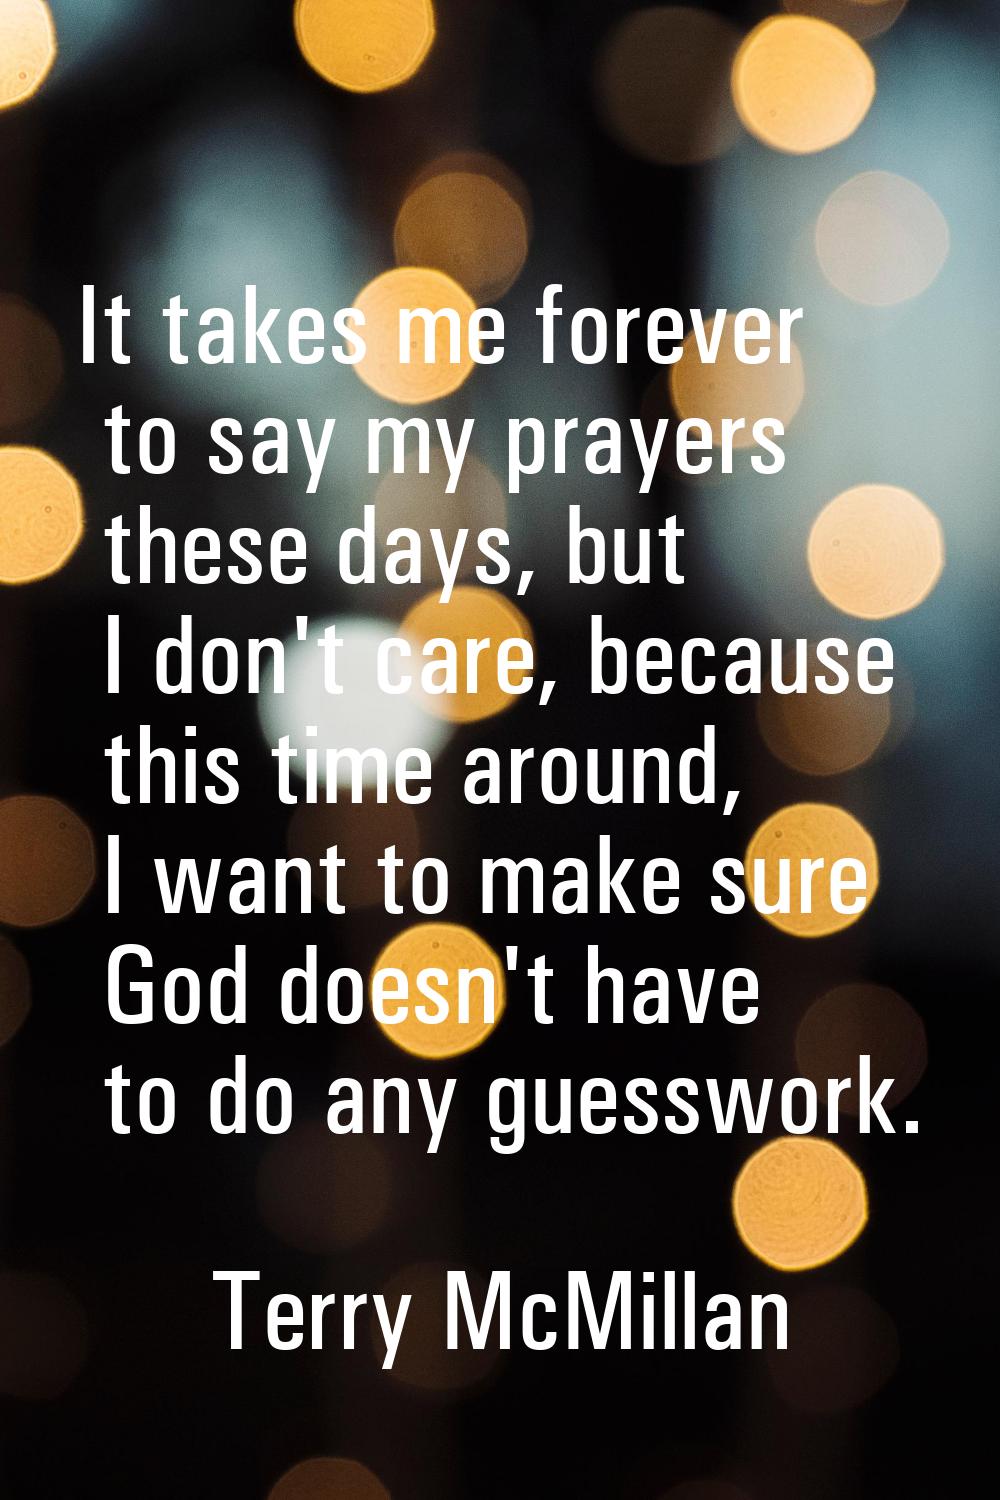 It takes me forever to say my prayers these days, but I don't care, because this time around, I wan